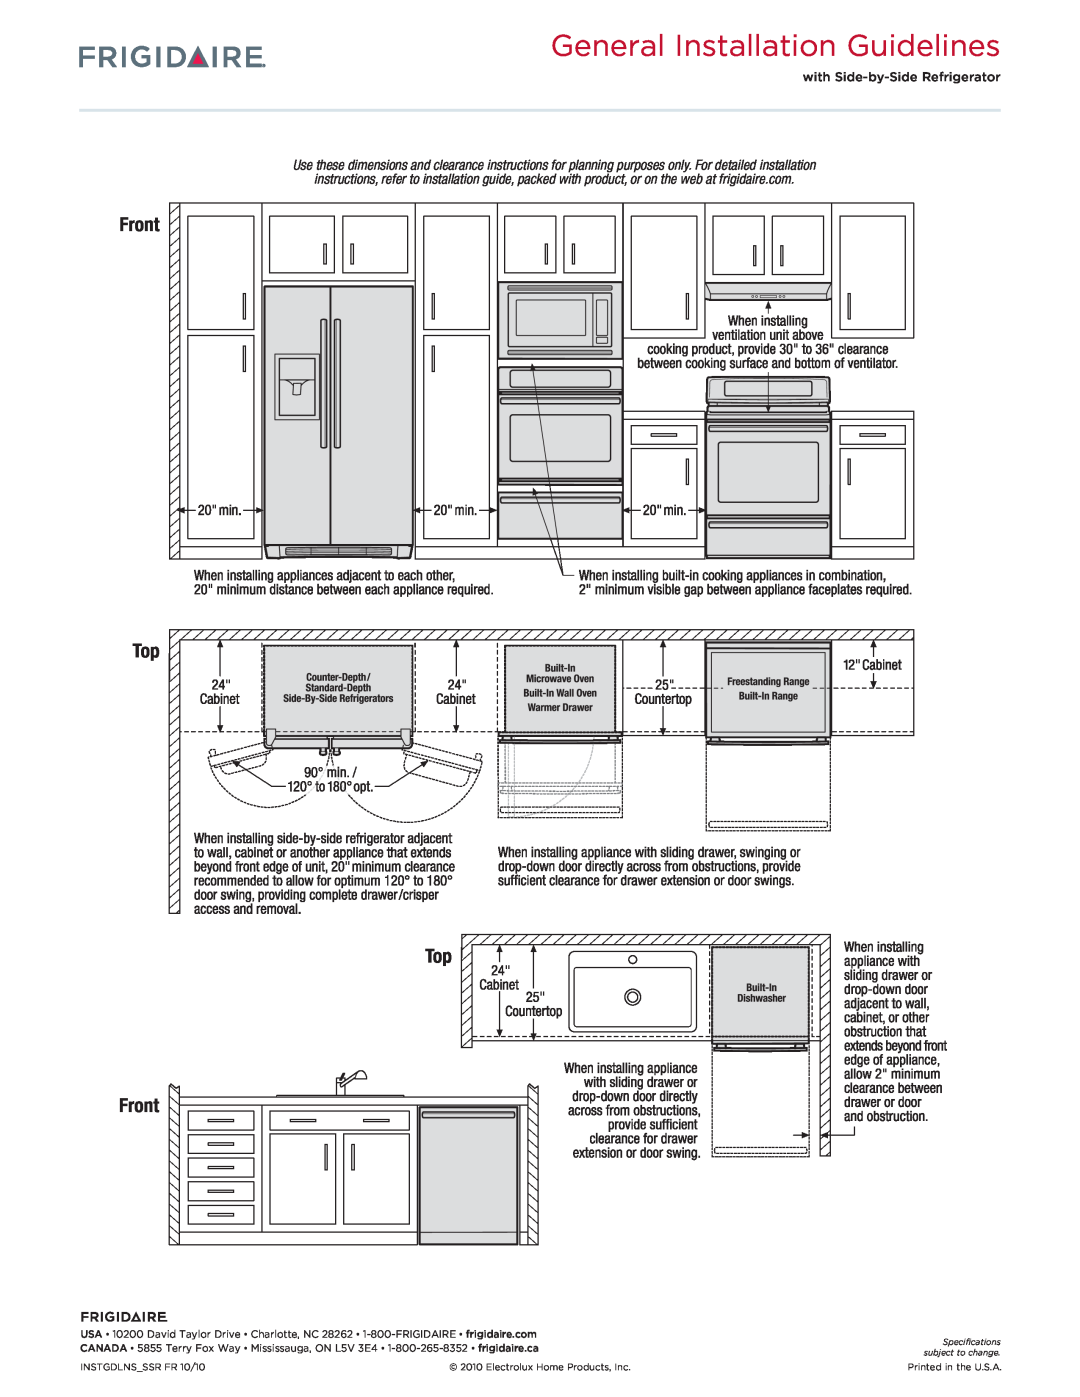 Frigidaire FFUS2613LS dimensions General Installation Guidelines, Top Front 